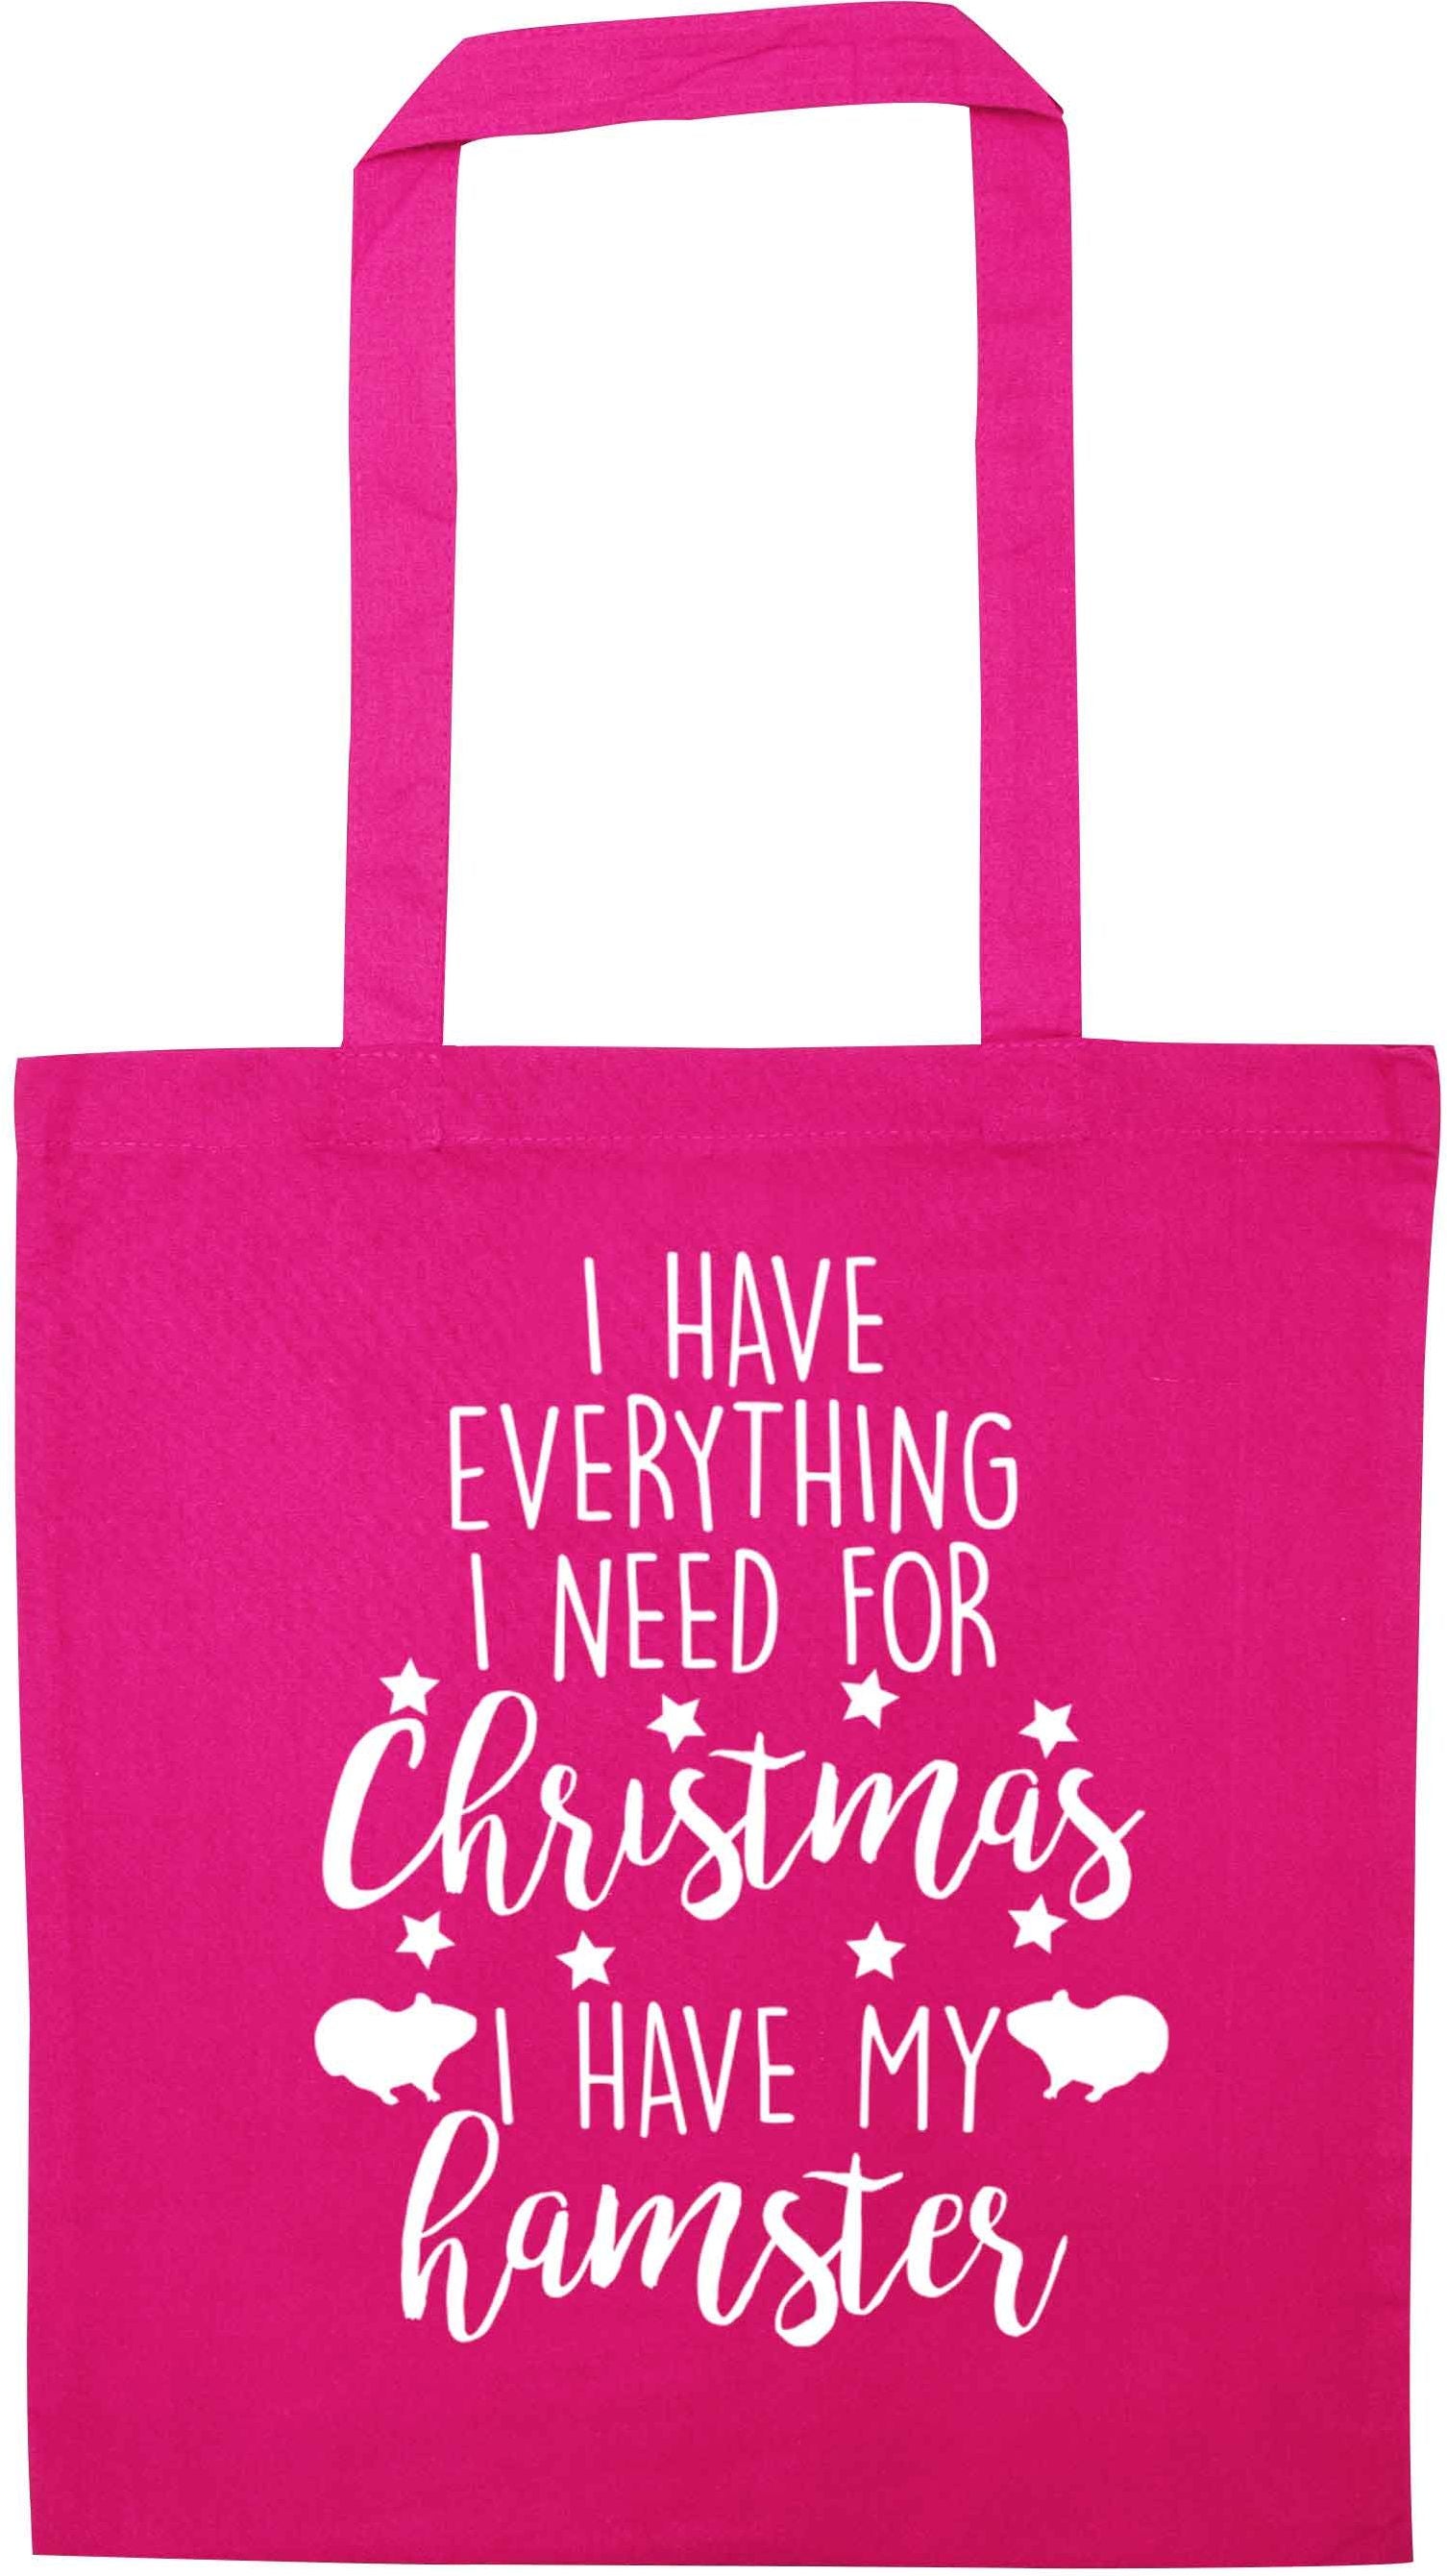 I have everything I need for Christmas I have my hamster pink tote bag